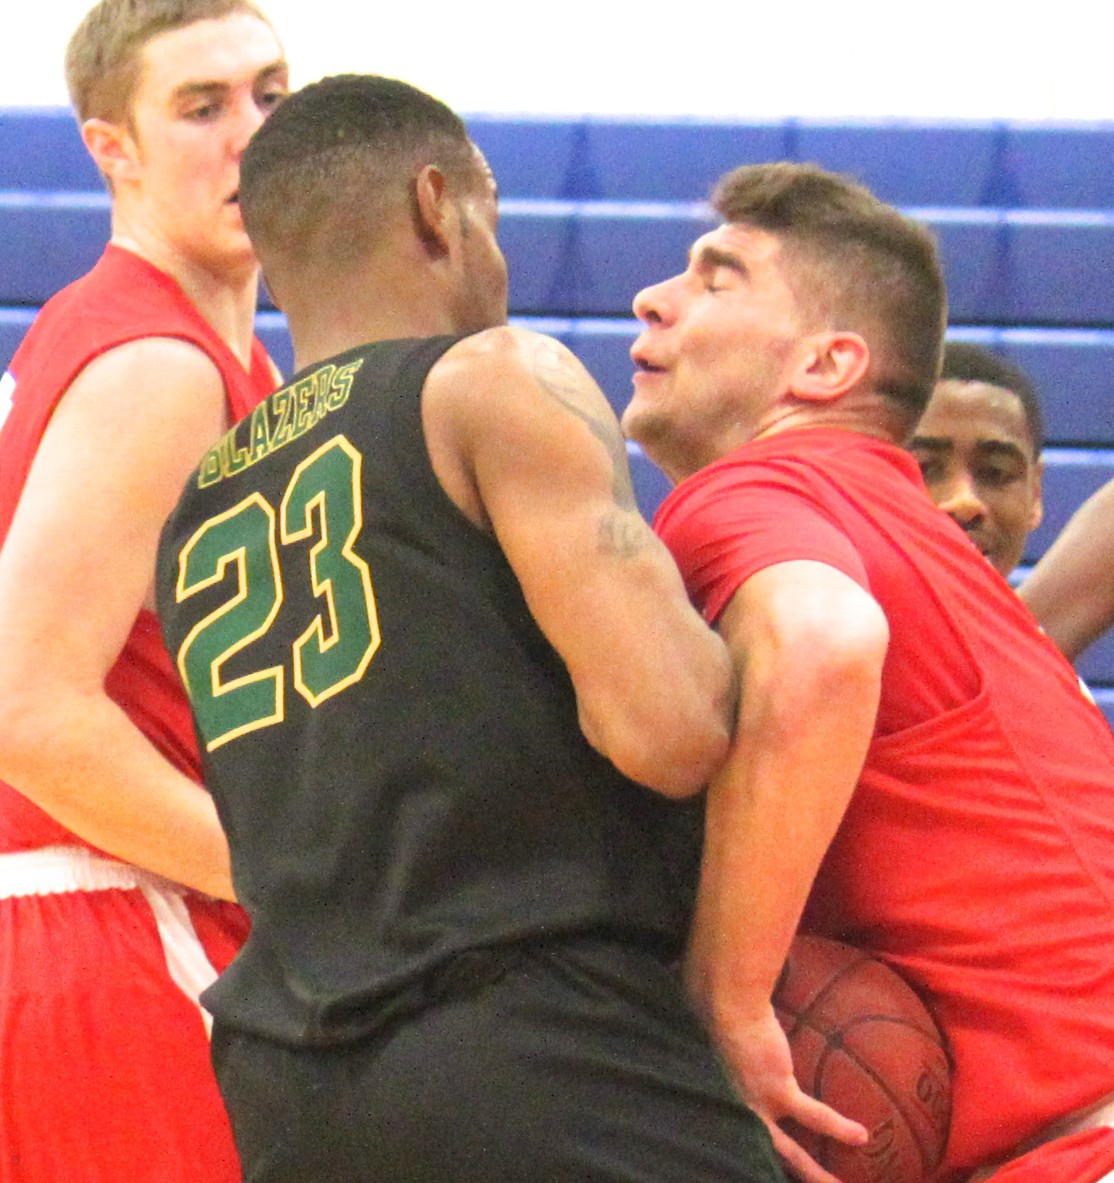 Edin Mehmodovic (31) fights for the rebound in Lincoln Lands game against John Wood Community College